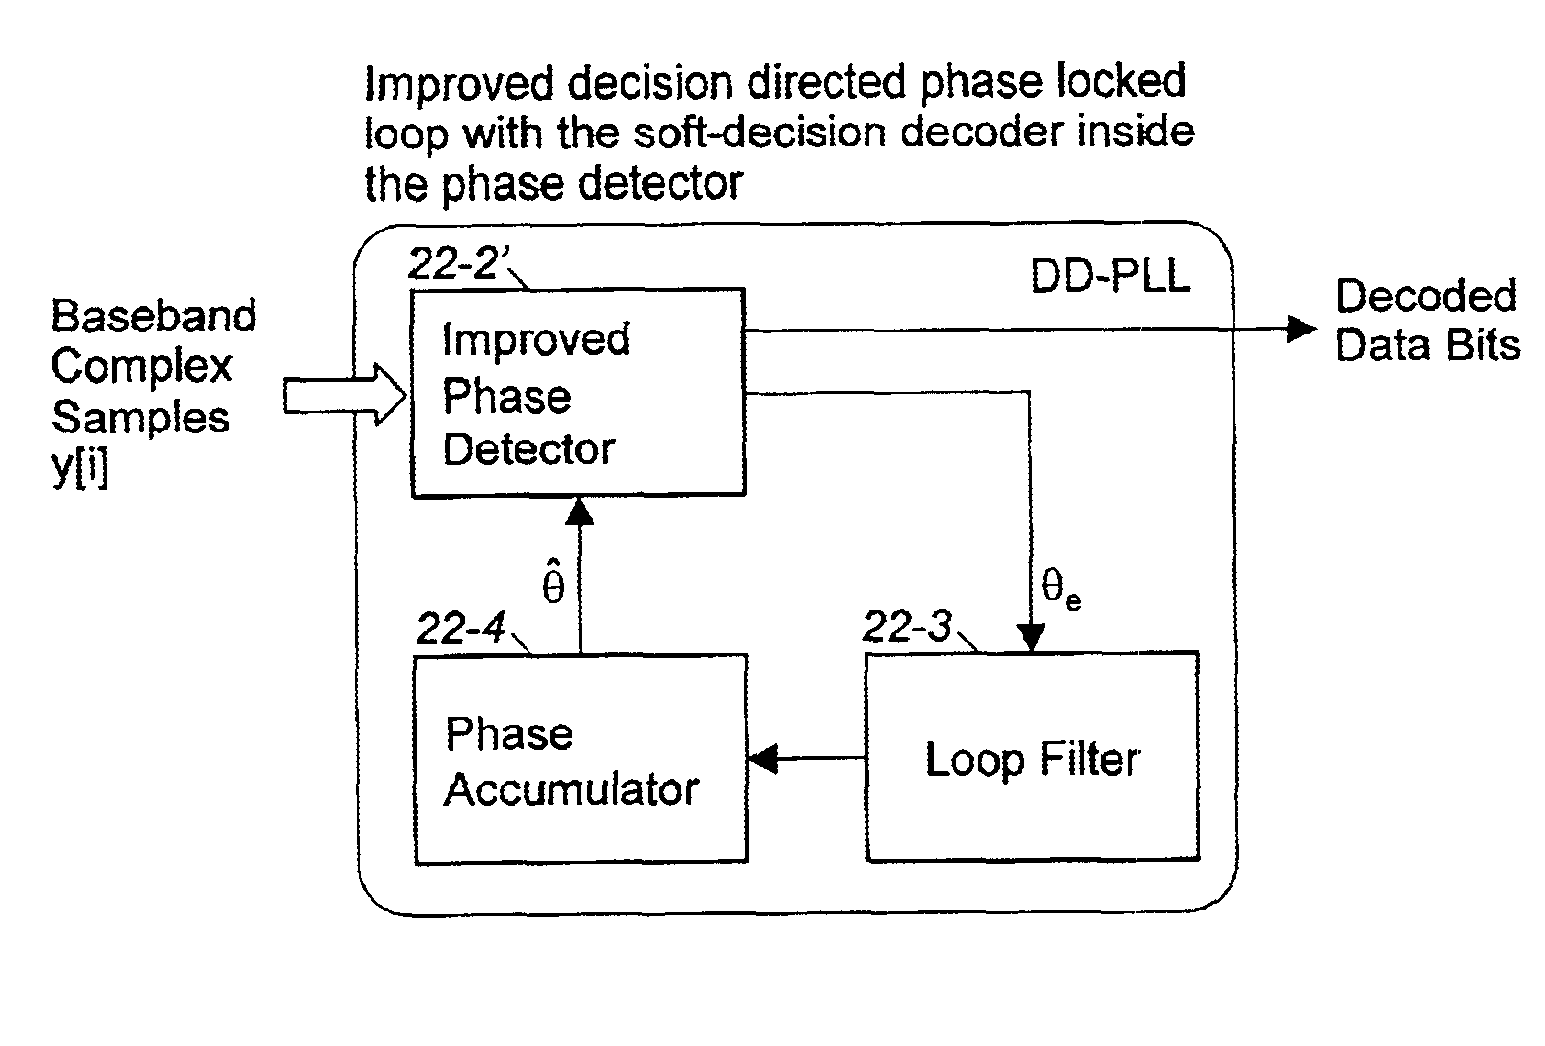 Efficient implementation of a decision directed phase locked loop (DD-PLL) for use with short block code in digital communication systems